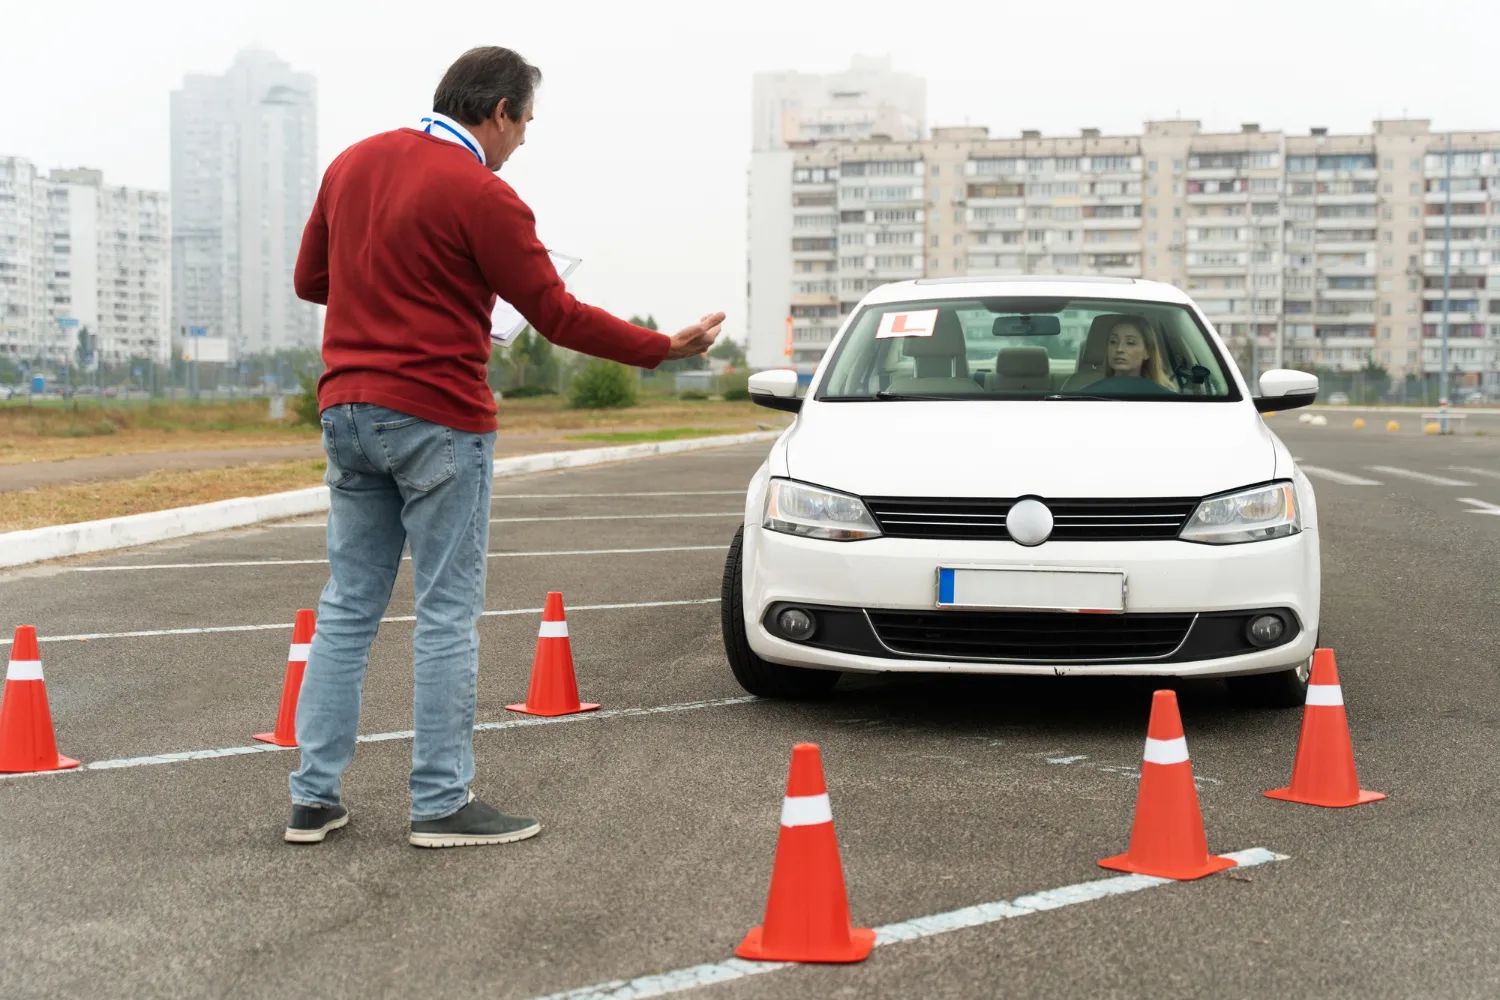 Decoding the Duration: How Long Does Driving Classes Take?